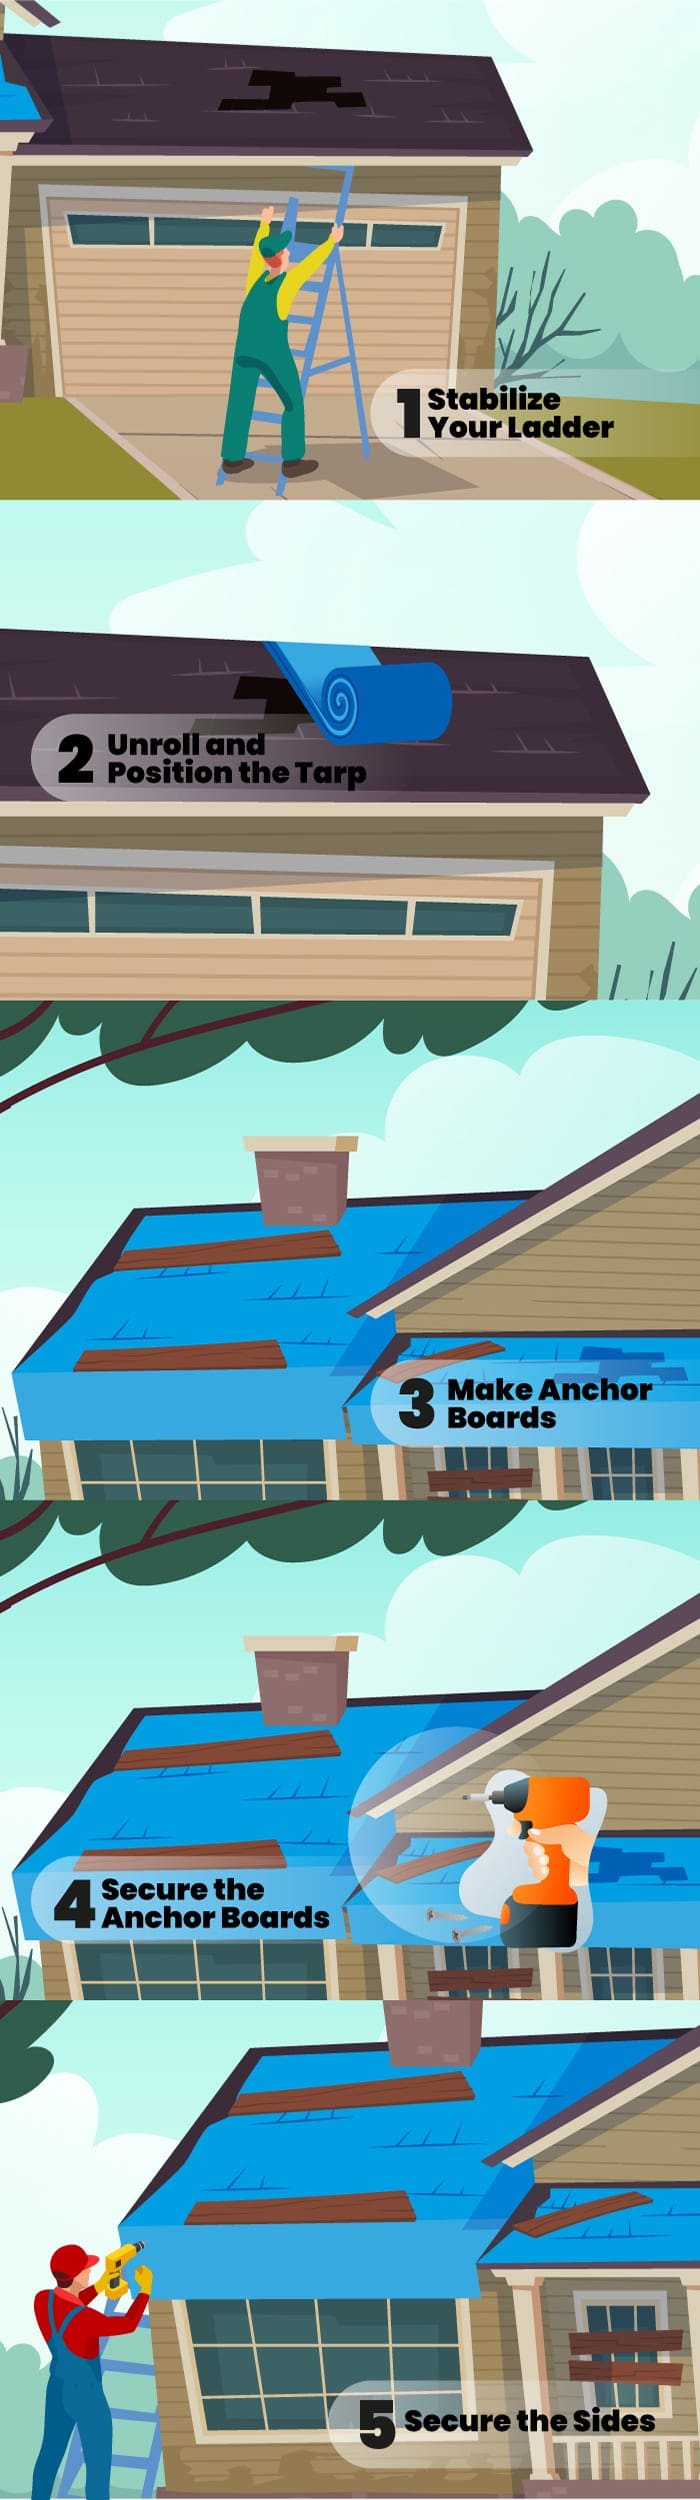 Infographic listing the various steps for a piece on how to tarp a roof